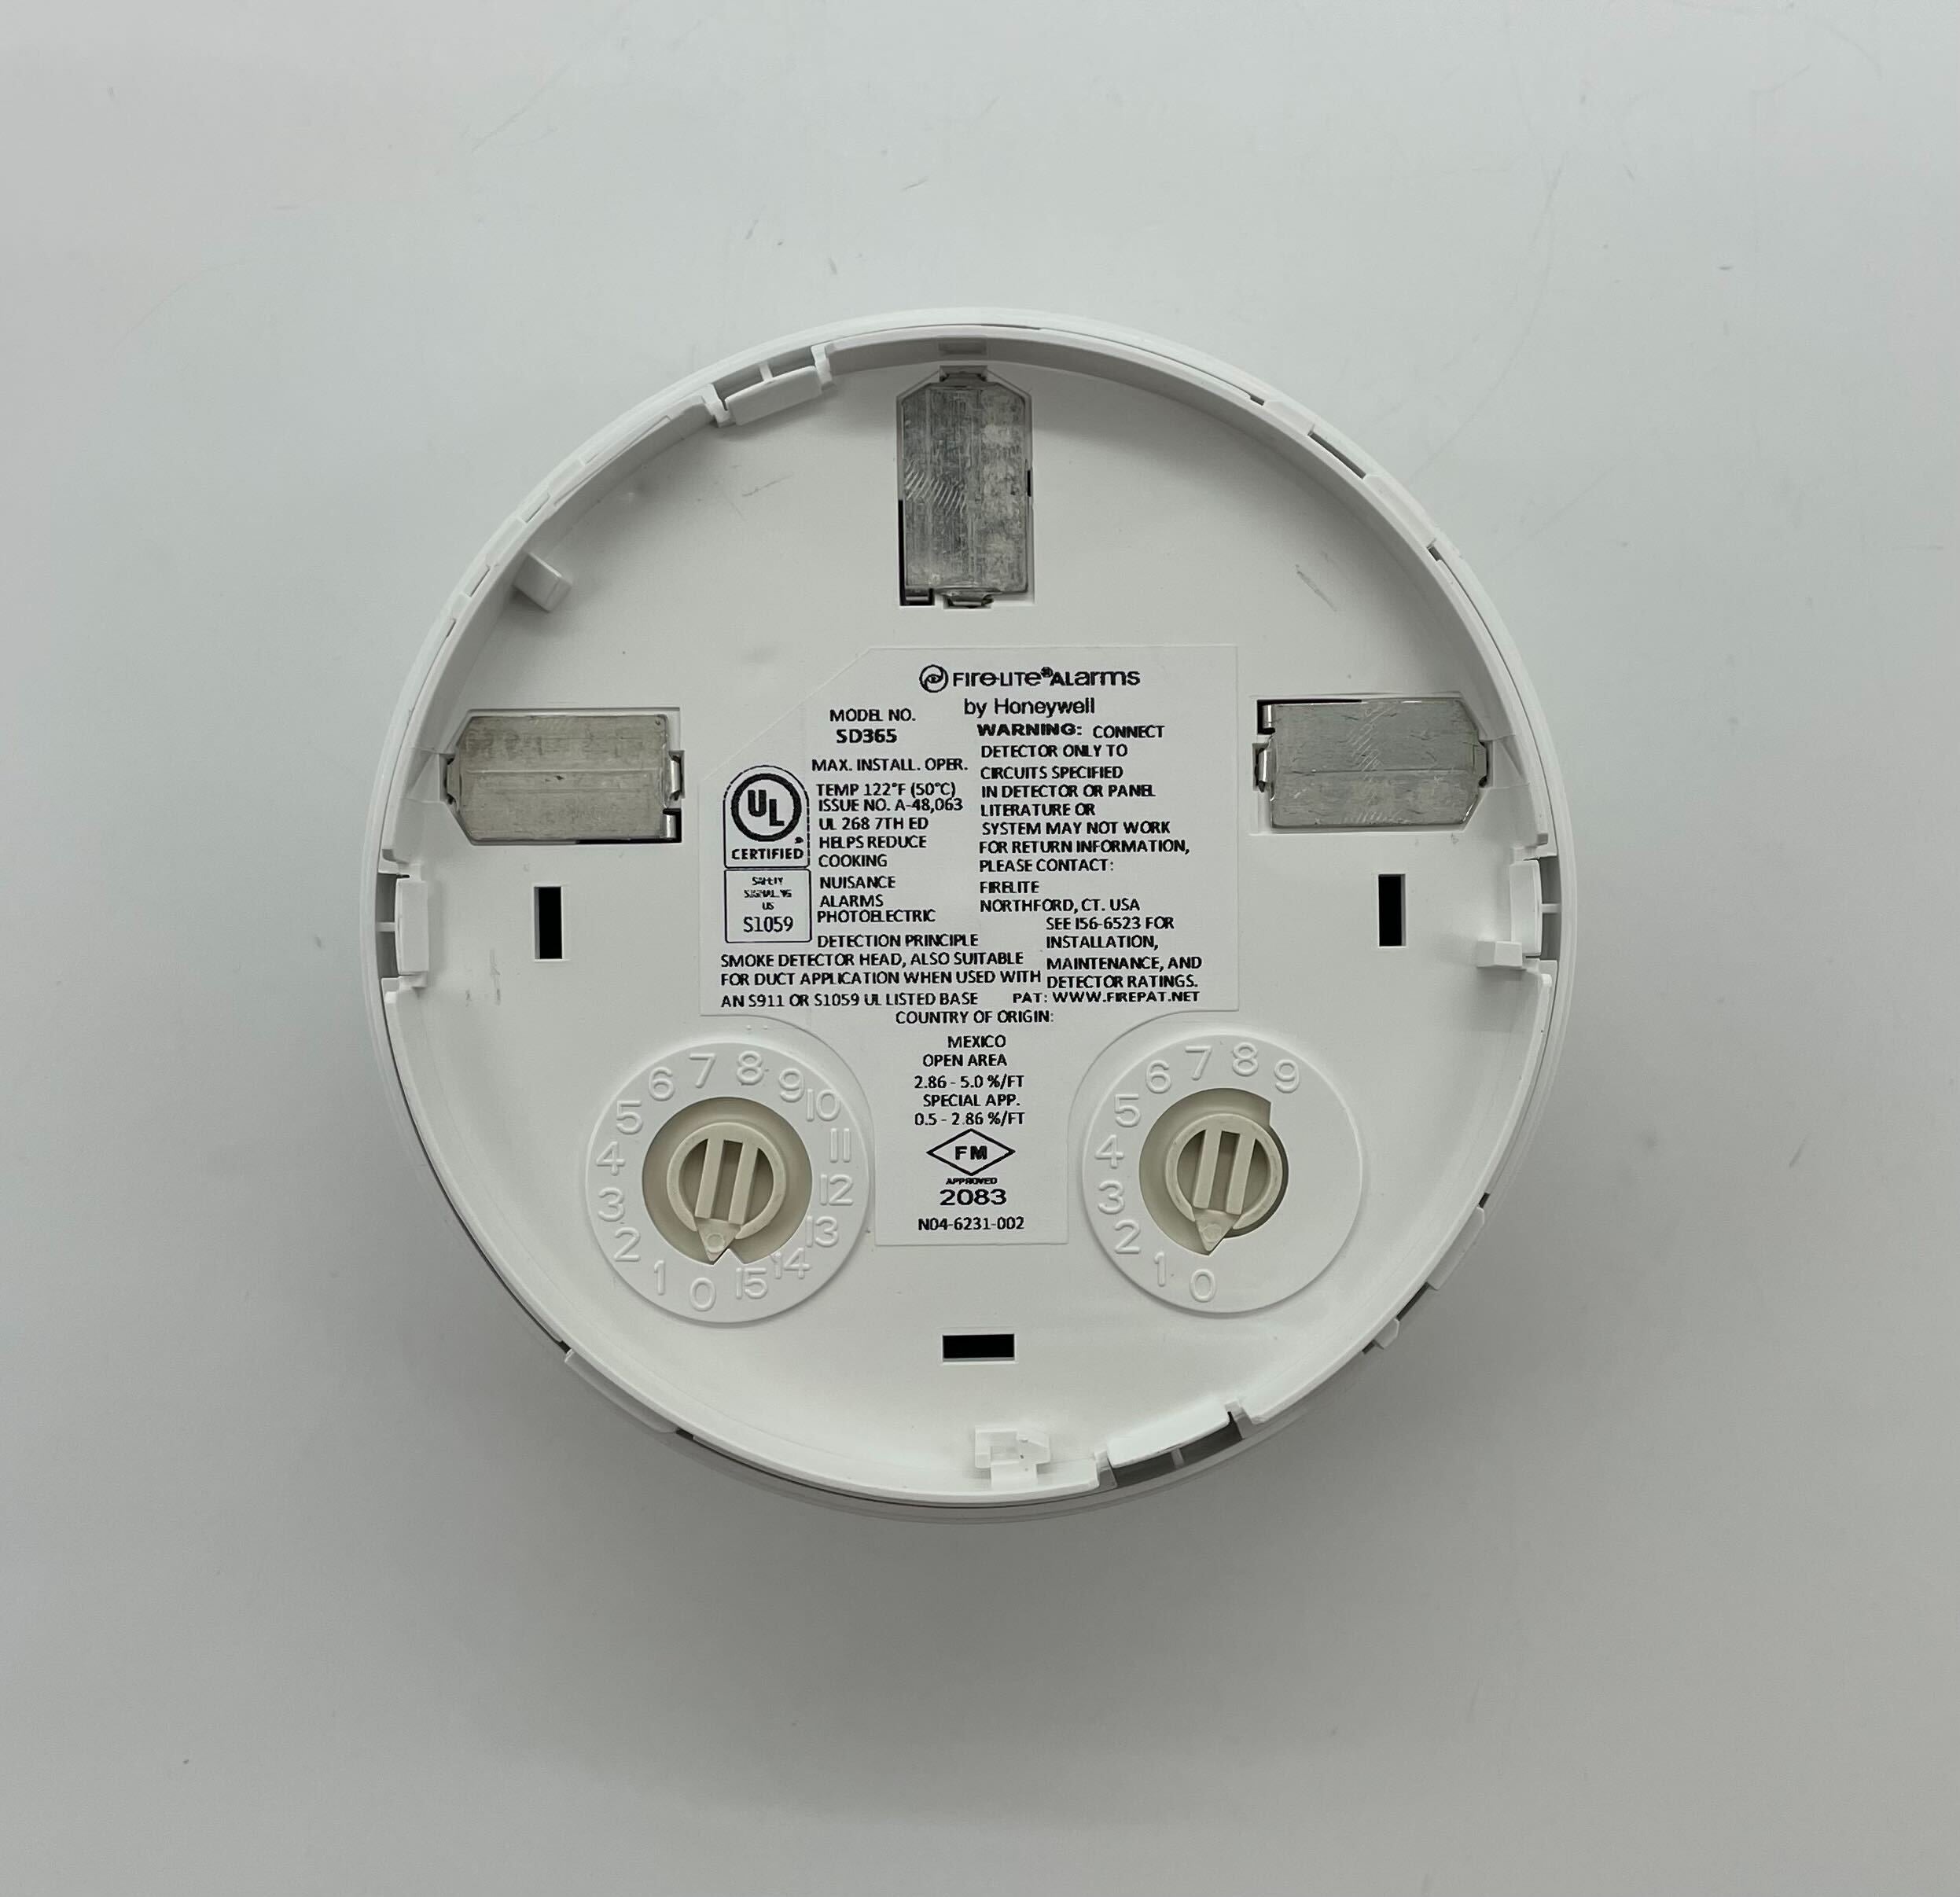 Firelite SD365 Series intelligent plug-in smoke detectors with enhanced optical sensing chamber and stable communication two-wire SLC loop connection Click here